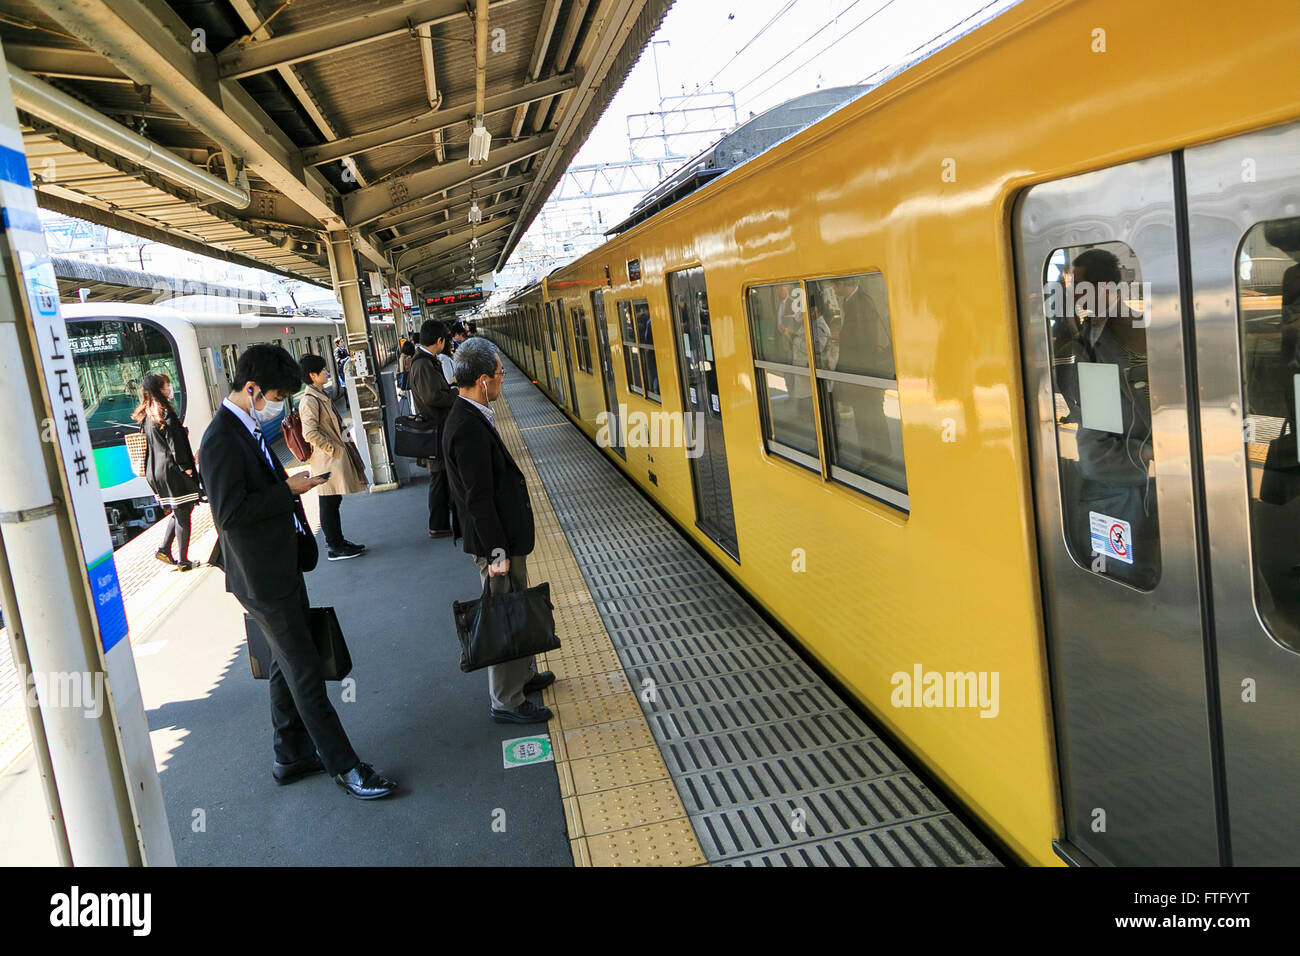 Passengers wait to aboard a yellow Seibu train at Kami-Shakujii station on March 29, 2016, Tokyo, Japan. Seibu Railway corporation announced that they will rent out entire carriages for party groups, on its Seibu Shinjuku, Ikebukuro, Hajima and Kokubunji Lines, allowing the group to choose which station to be picked up at and to be dropped off at. The special party service is aimed at alumni groups especially those that previously studied and commuted along one of the lines. In collaboration with Syoya Inc., a company specialised in organising alumni parties, the train company is taking bookin Stock Photo